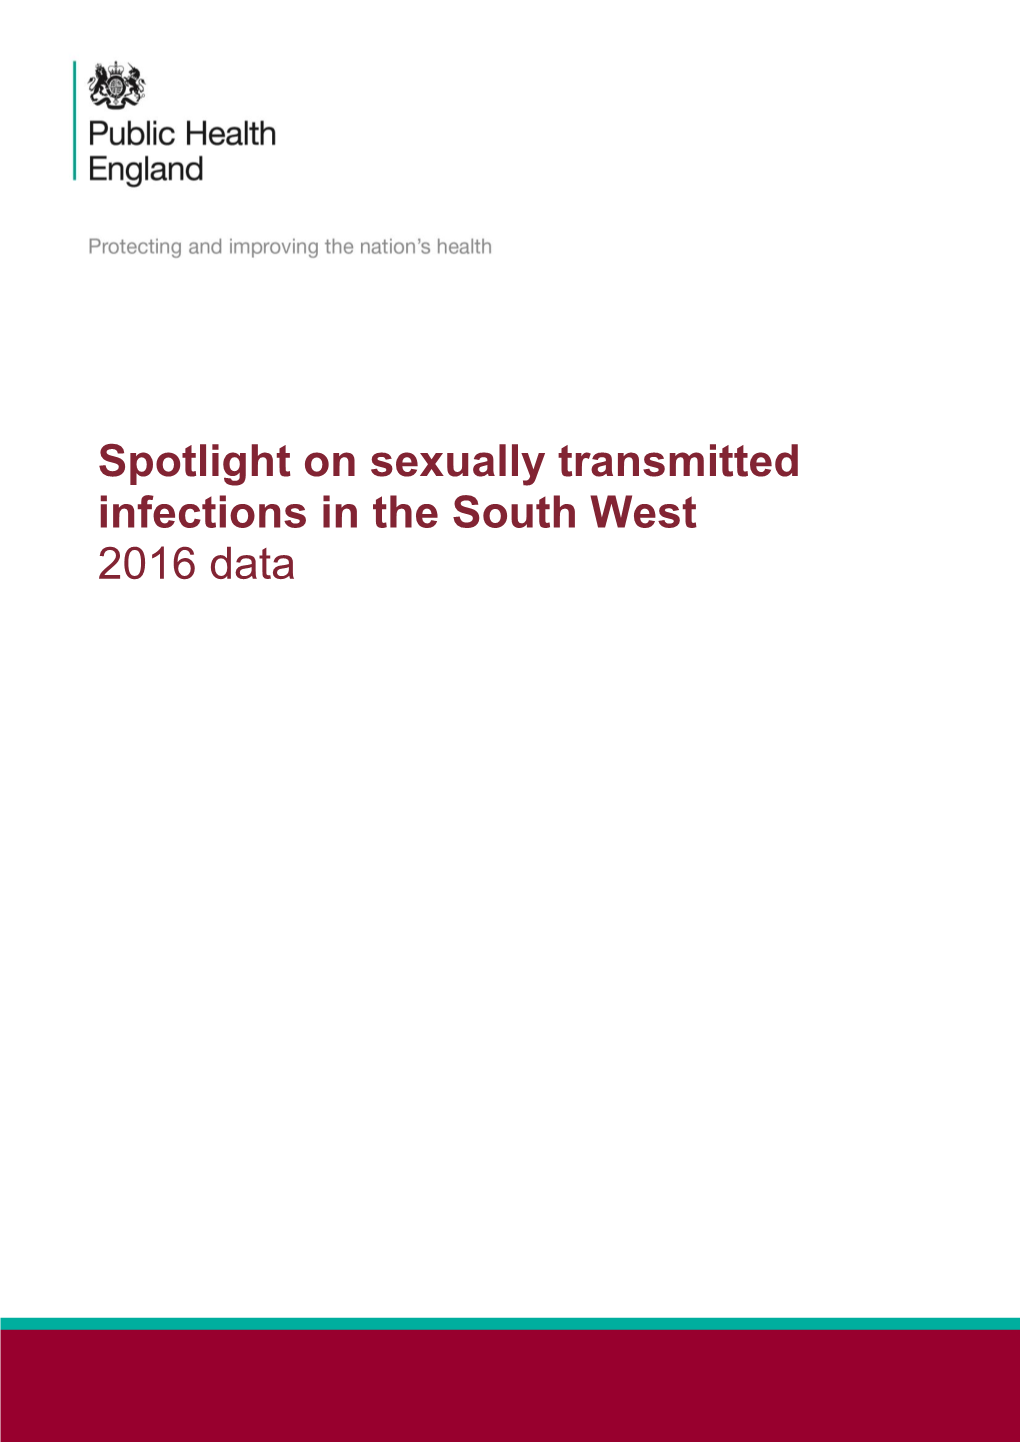 Spotlight on Sexually Transmitted Infections in the South West 2016 Data